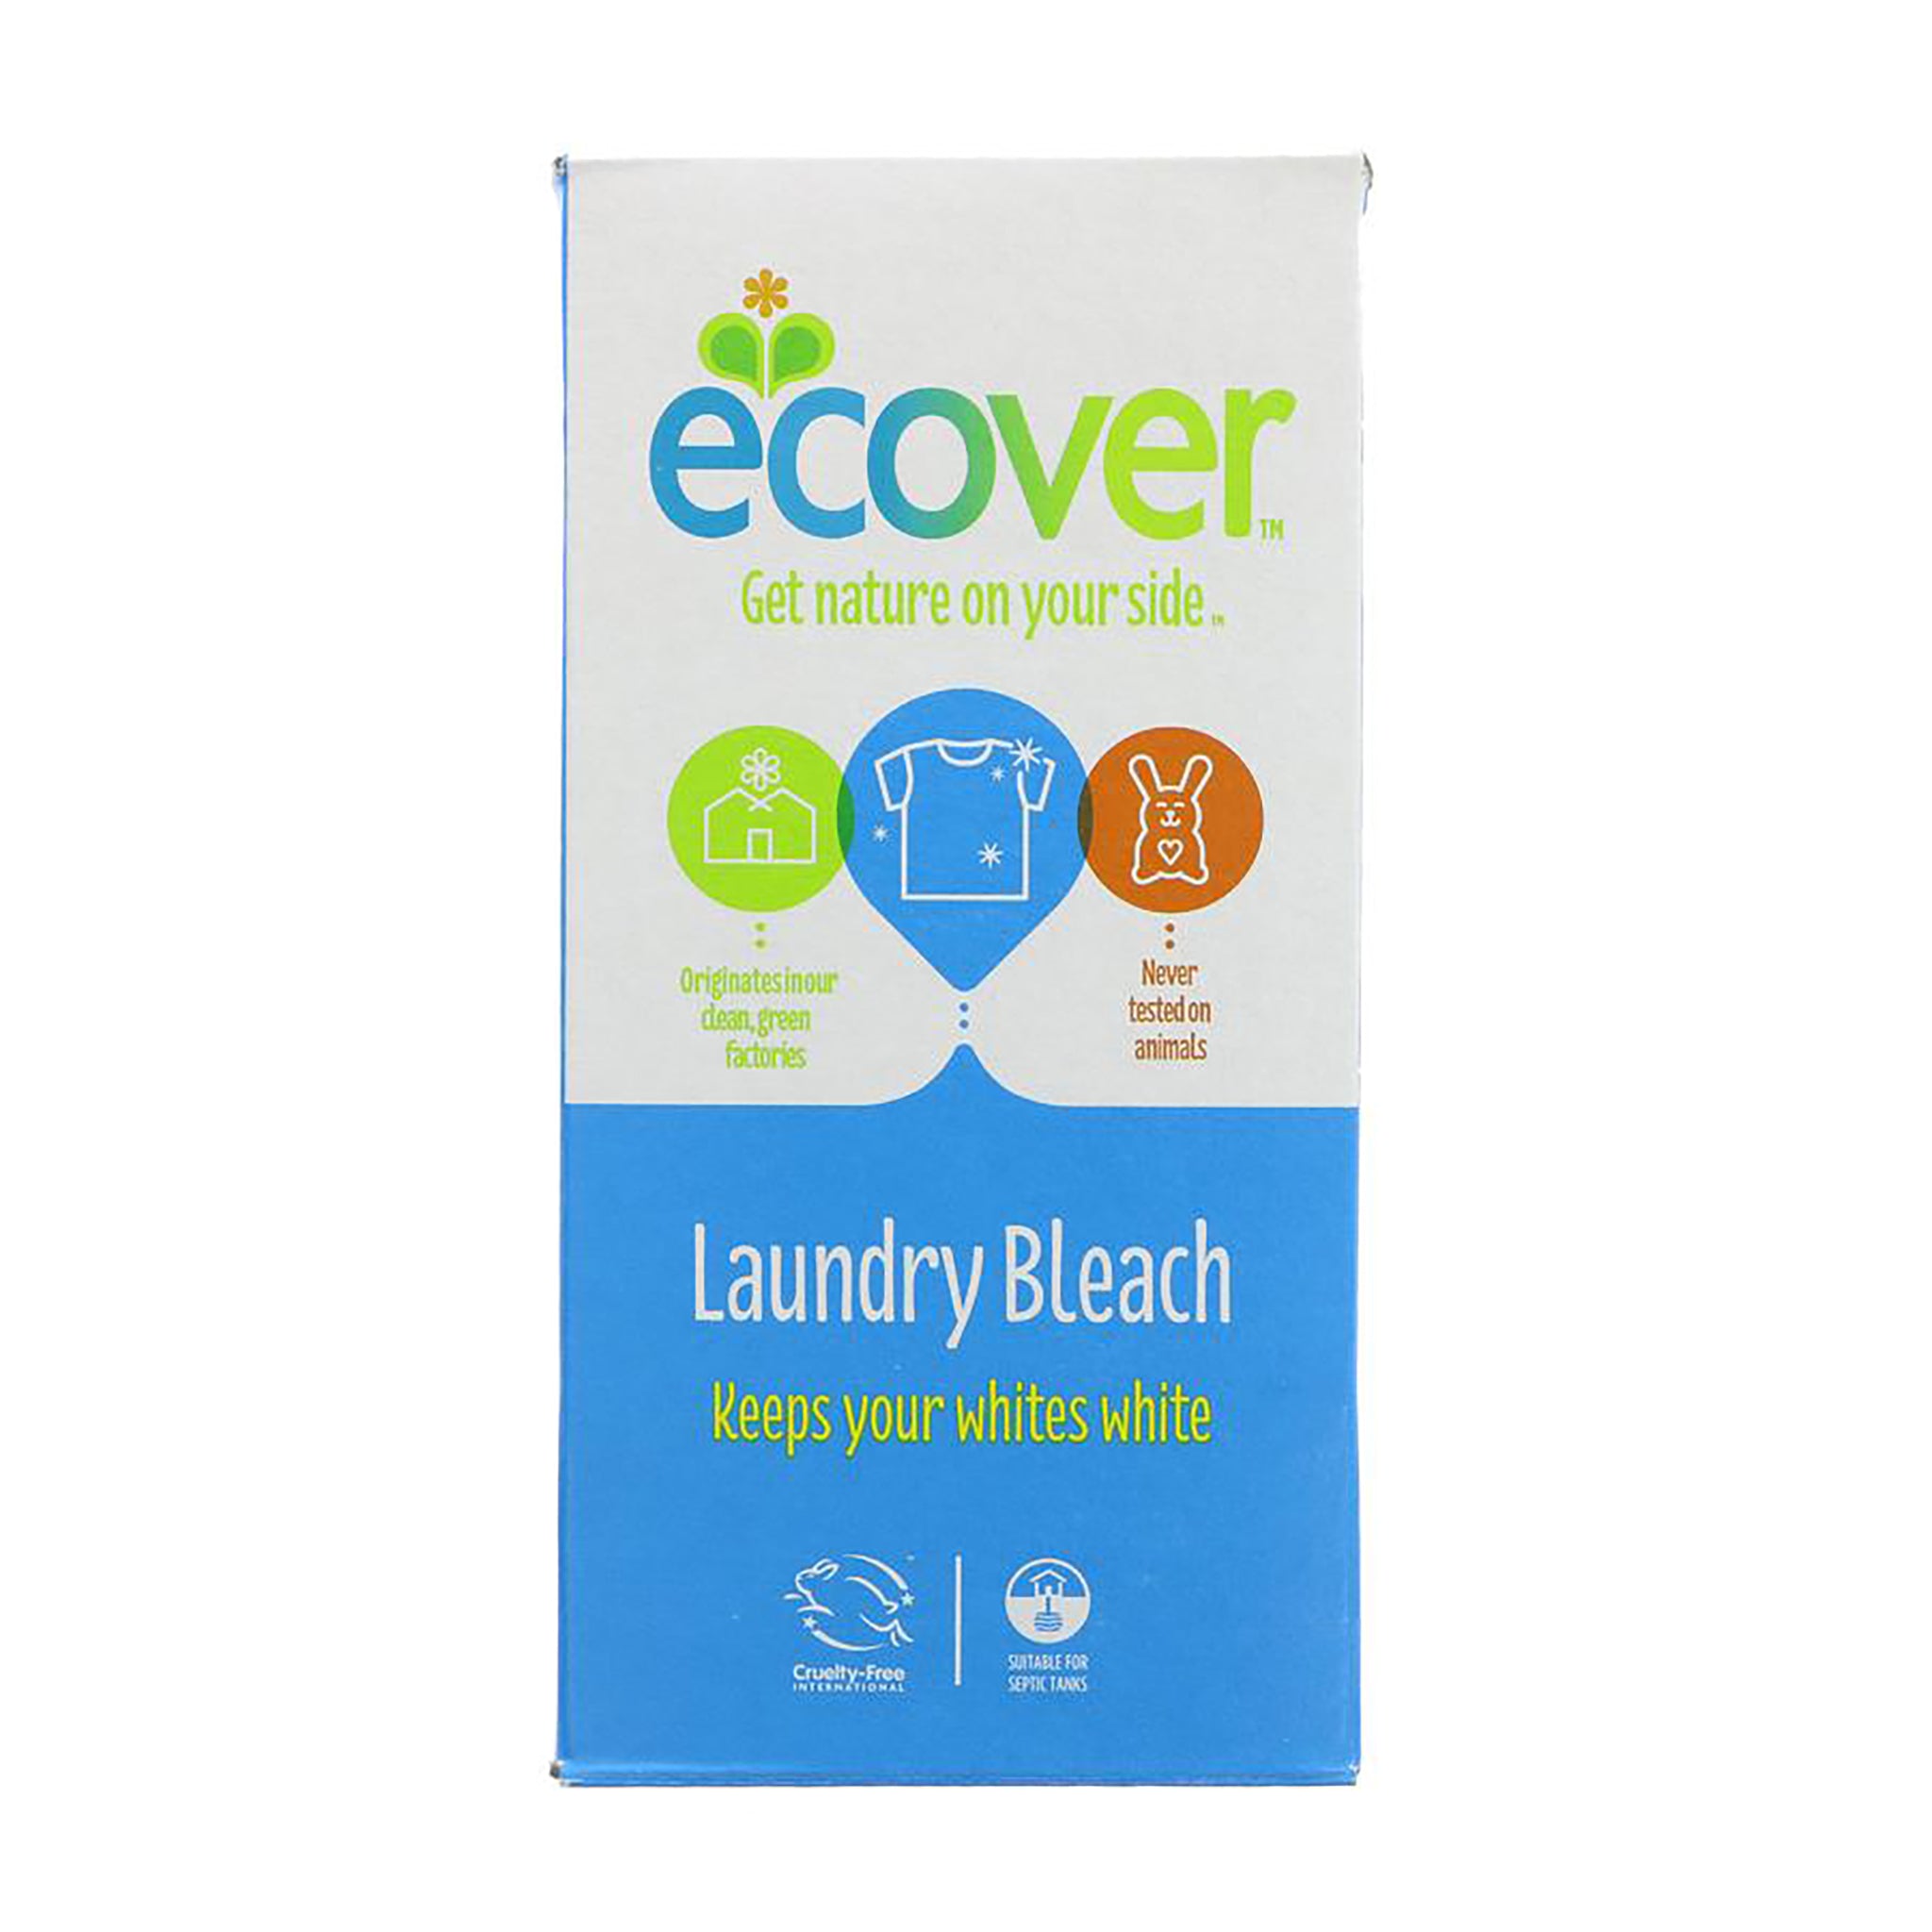 Ecover eco-friendly laundry bleach